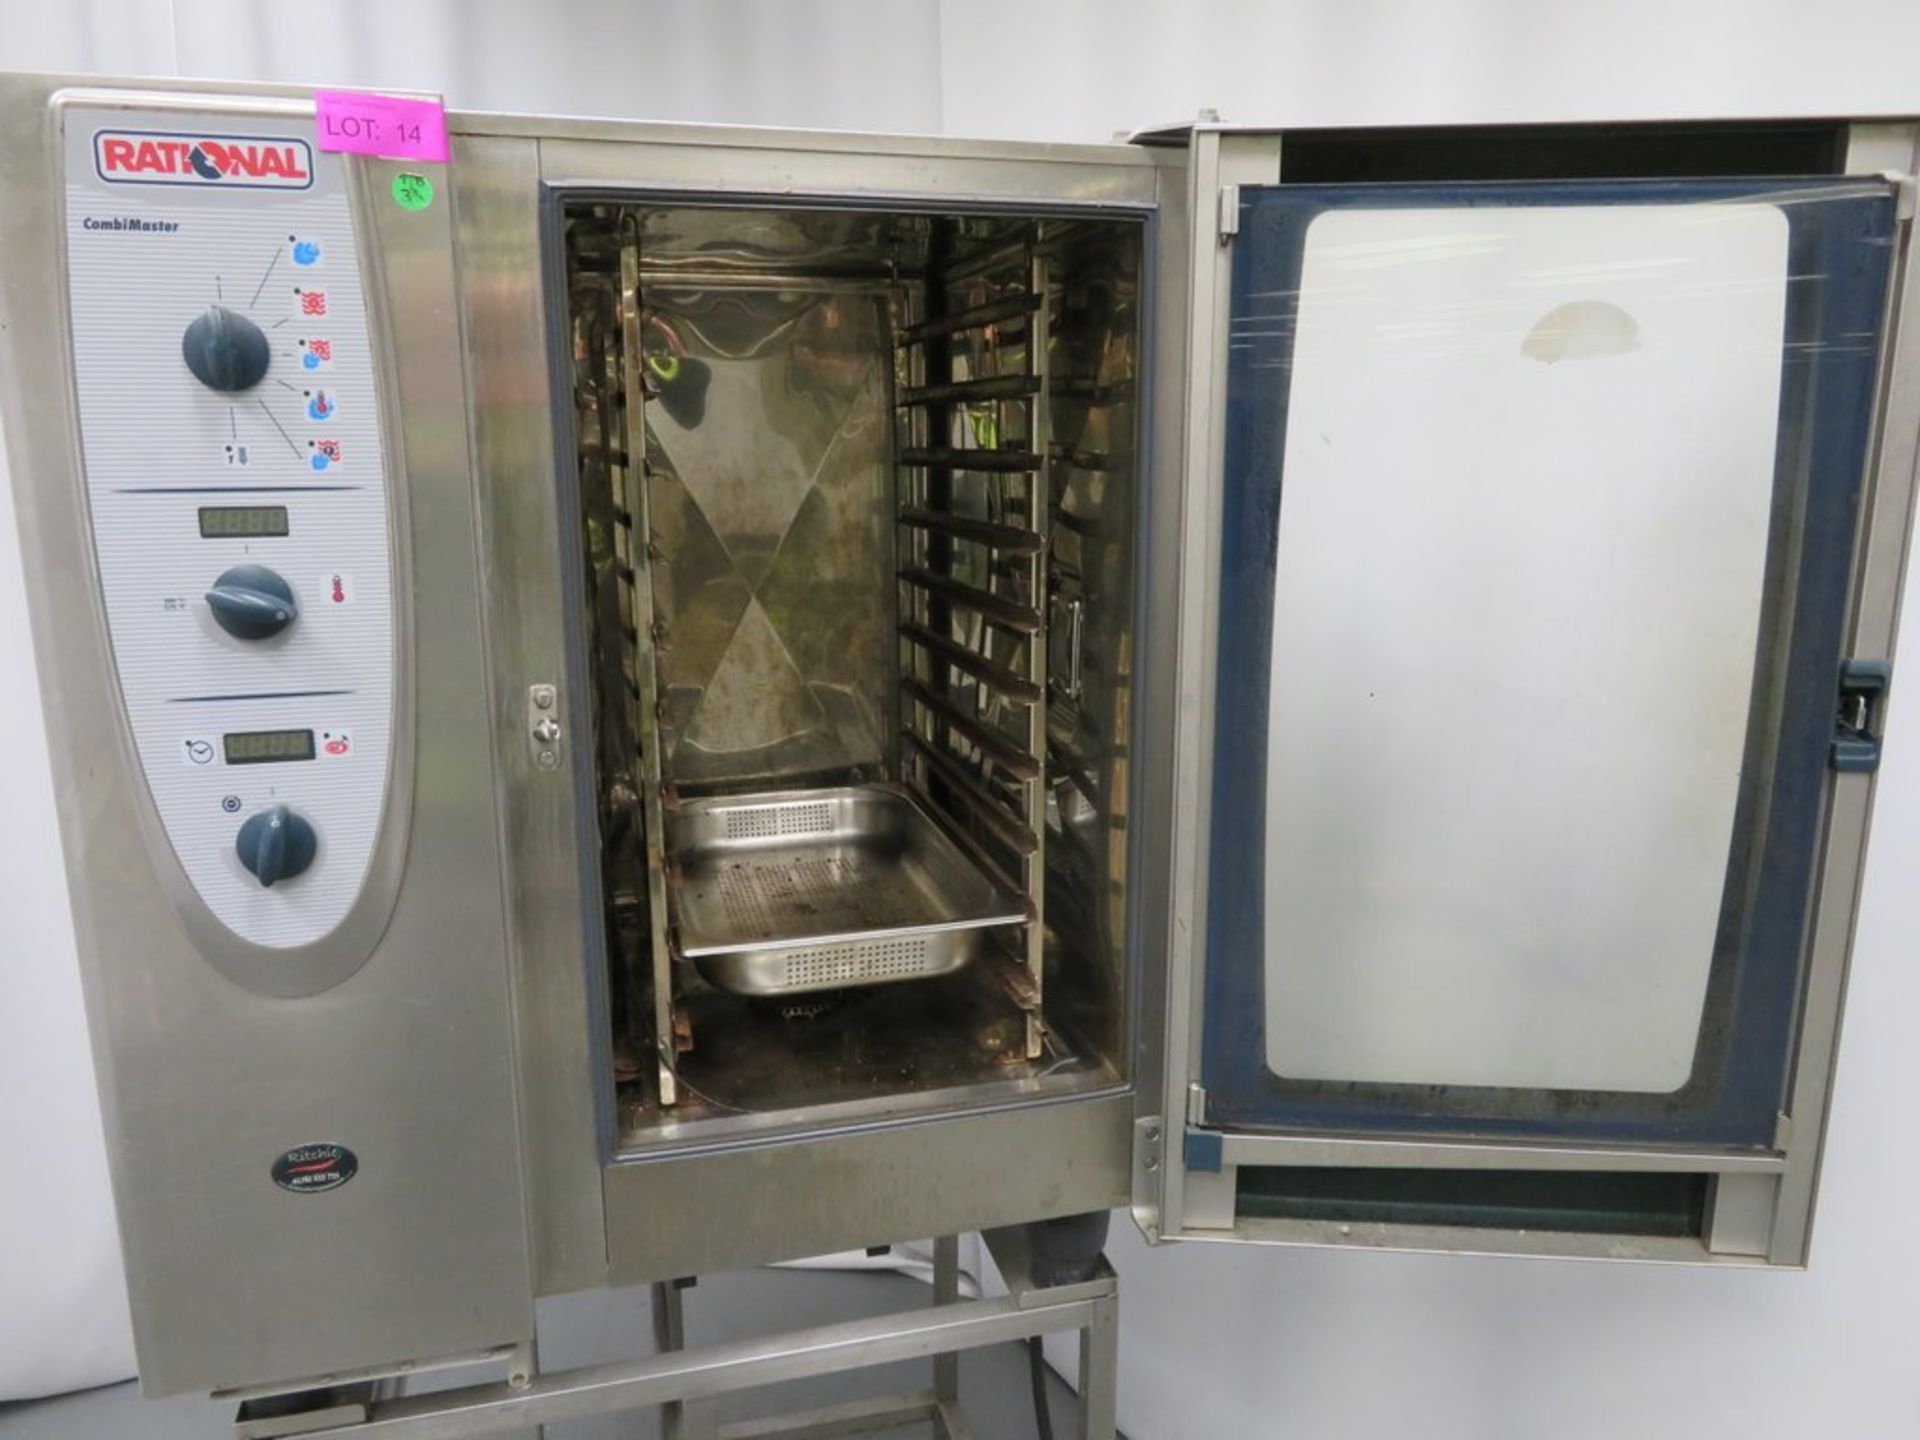 Rational CombiMaster CM101 10 grid combi oven, 3 phase electric - Image 6 of 7